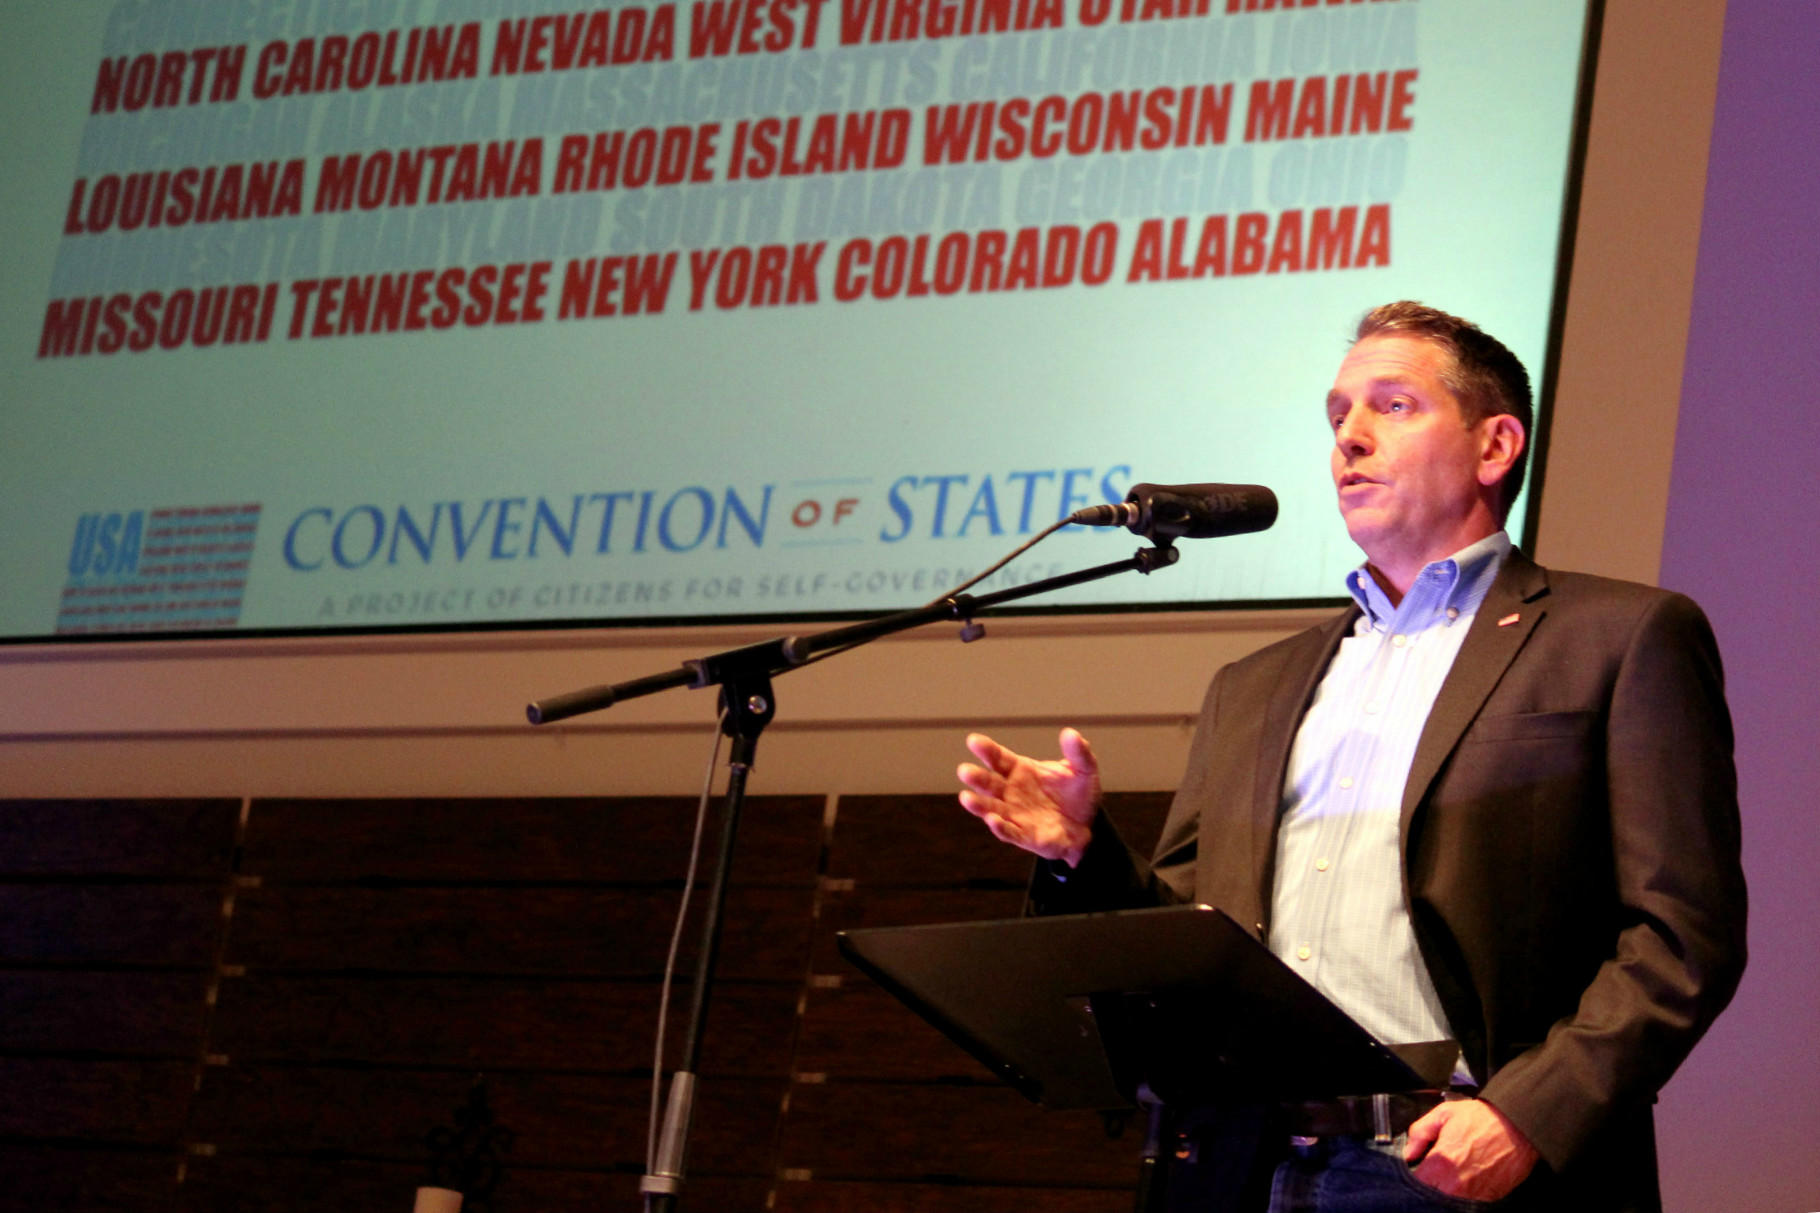 Mark Meckler, who co-founded the Convention of States project, told a crowd in Fort Worth that the only way to fix the federal government is to amend the constitution.